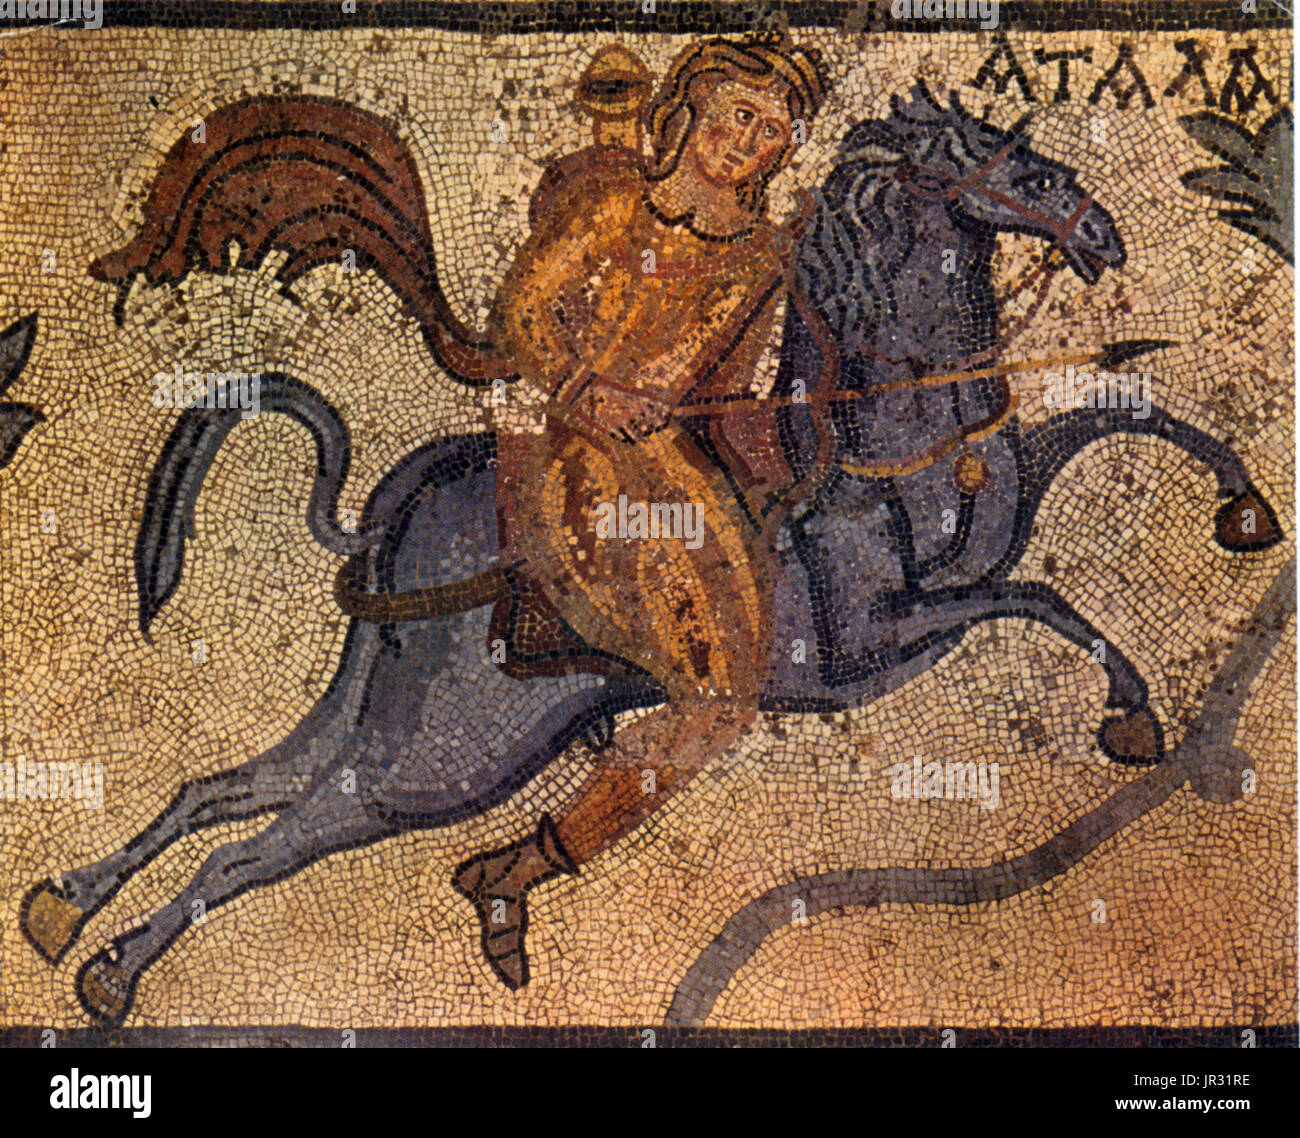 Panel from a mosaic pavement: Atalanta, on horseback, hunts a lion. The lion and the end of the Greek inscription giving Atalanta's name are missing. From a Roman Villa at Halicarnassus, 4th century AD. Atalanta is a character in Greek mythology, a virgin huntress, unwilling to marry, and loved by the hero Meleager. Having grown up in the wilderness, Atalanta became a fierce hunter and was always happy. She took an oath of virginity to the goddess Artemis. Halicarnassus was an ancient Greek city at the site of modern Bodrum in Turkey. The city was famous for the tomb of Mausolus, the origin of Stock Photo